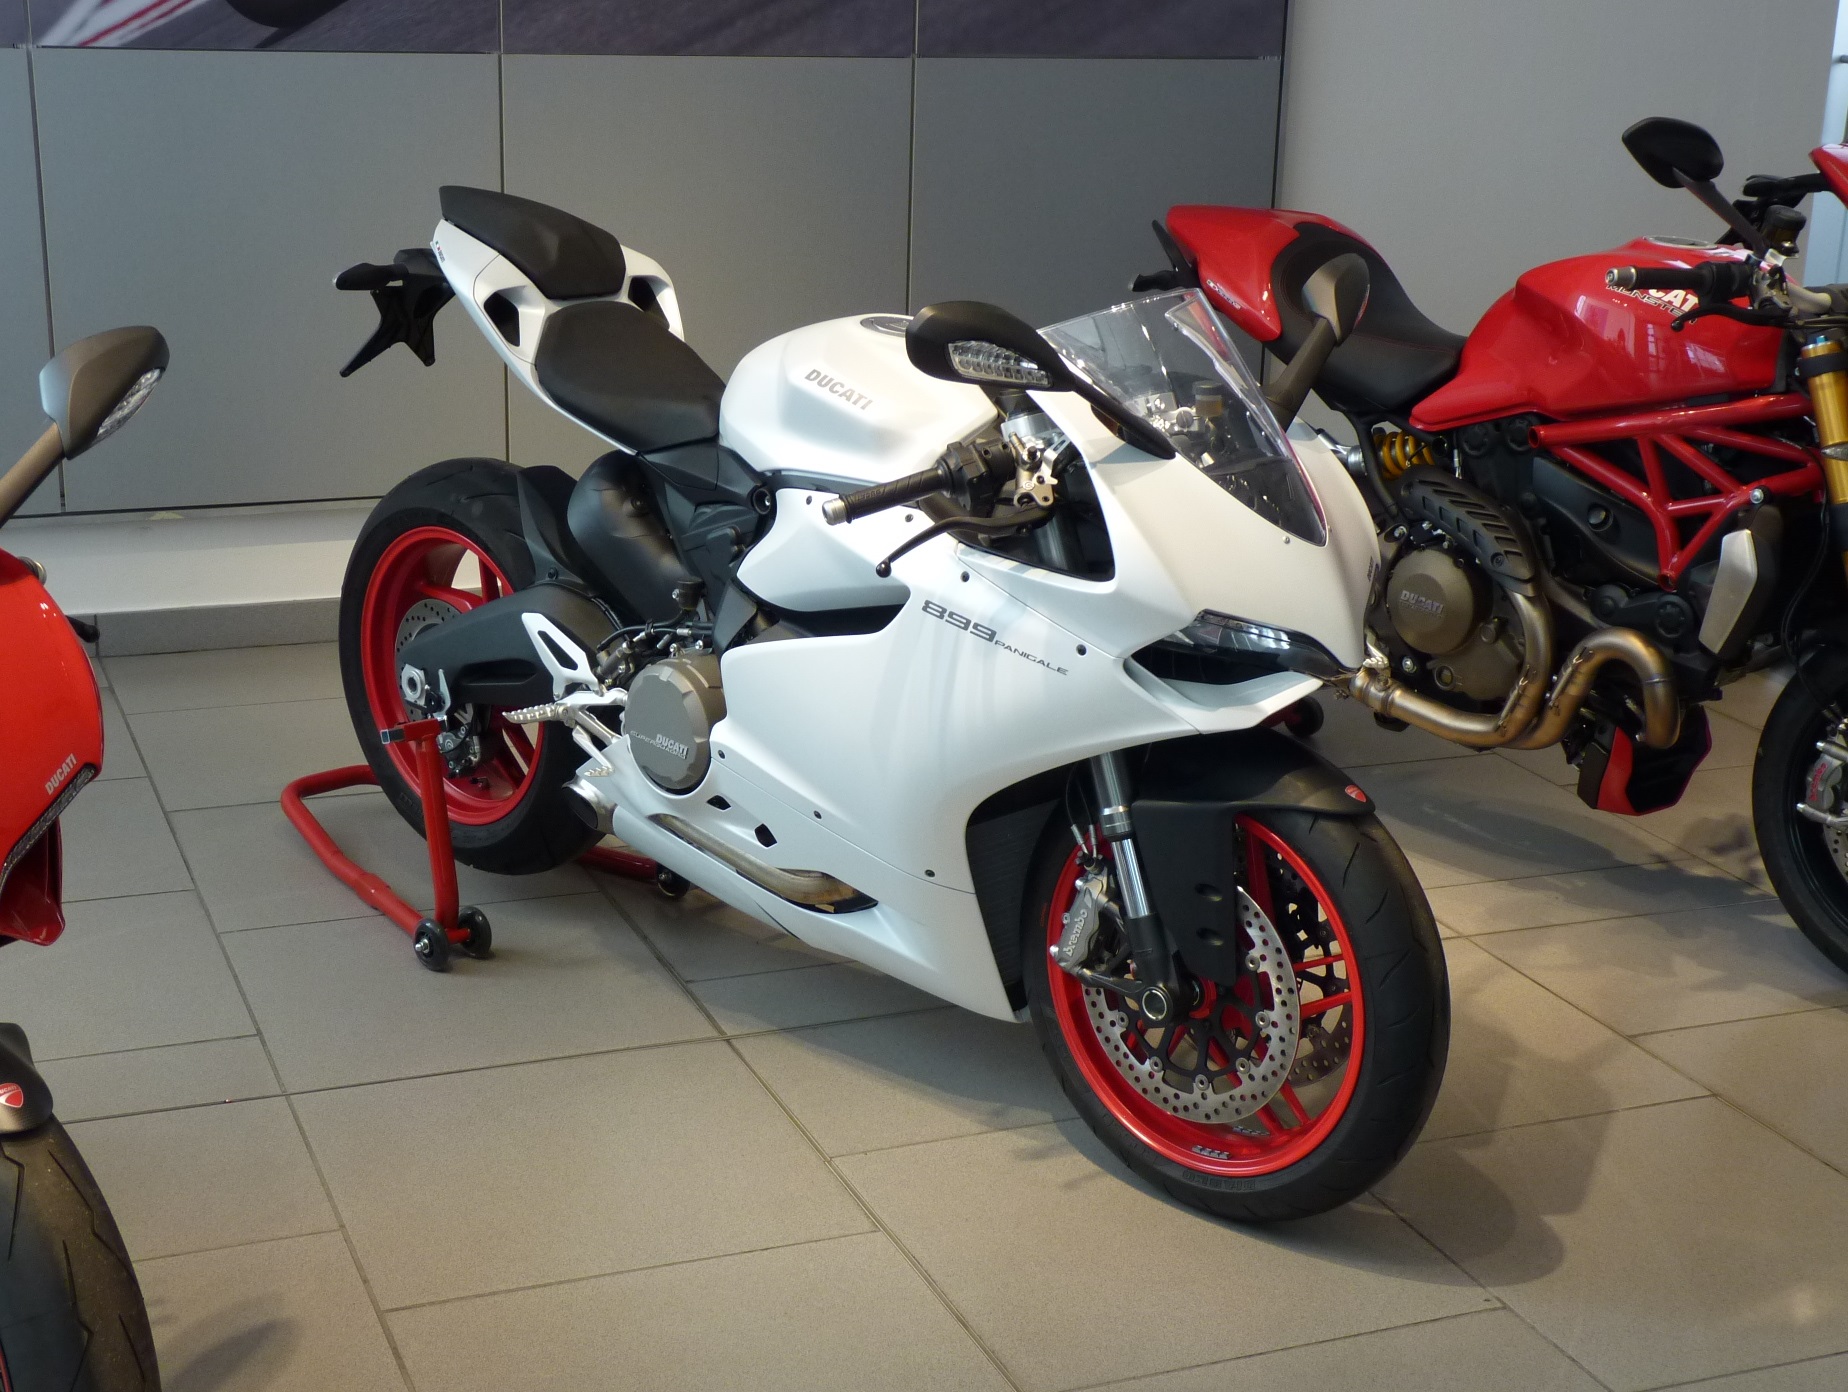 Ducati UK concludes 2013 with a final flourish to the year